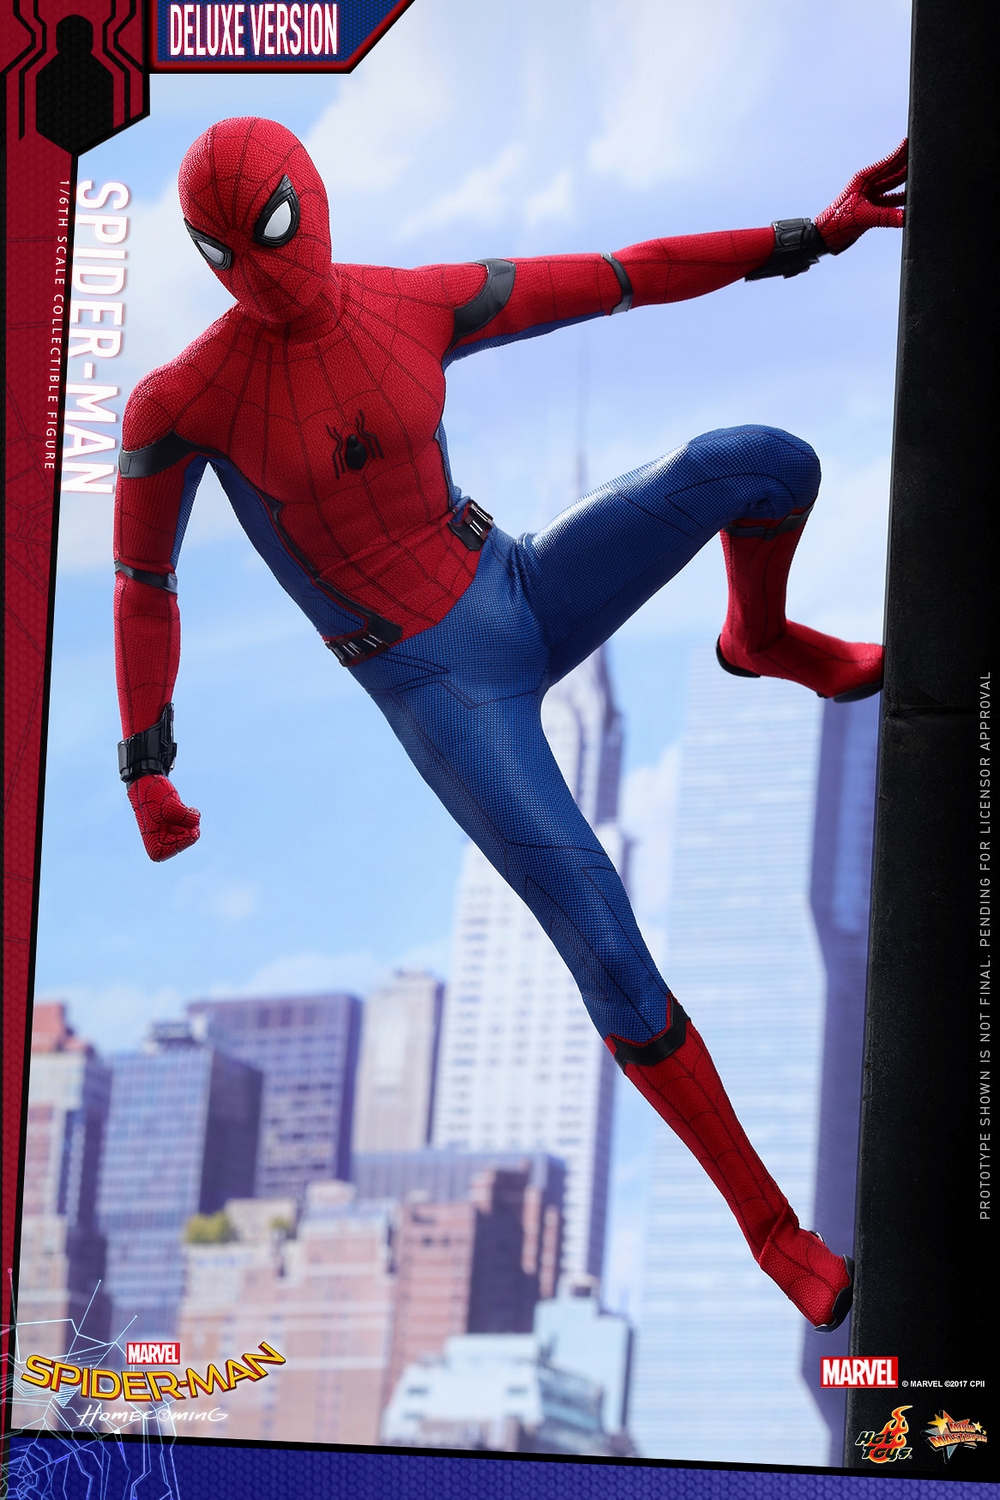 Hot-Toys-MMS426-Spider-Man-Homecoming-Deluxe-008.jpg